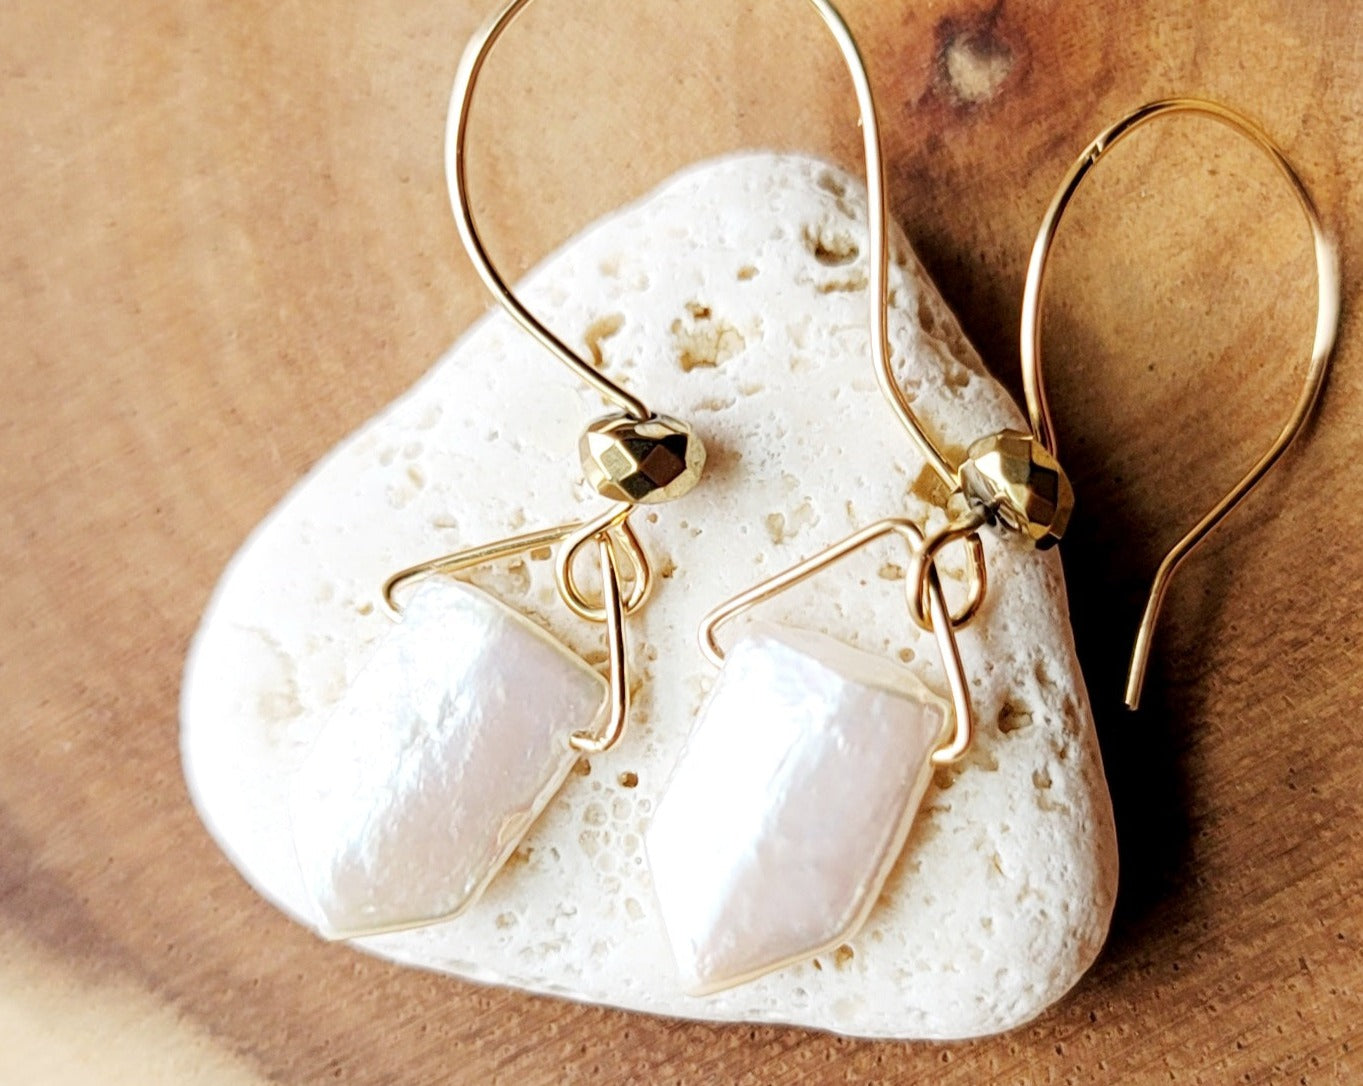 Follow Your Dreams Pearl Arrow Earrings, 14k Gold Filled, Genuine Freshwater Cultured Pearl Arrows, sparkly gold plated Hematite. Displayed on Stone